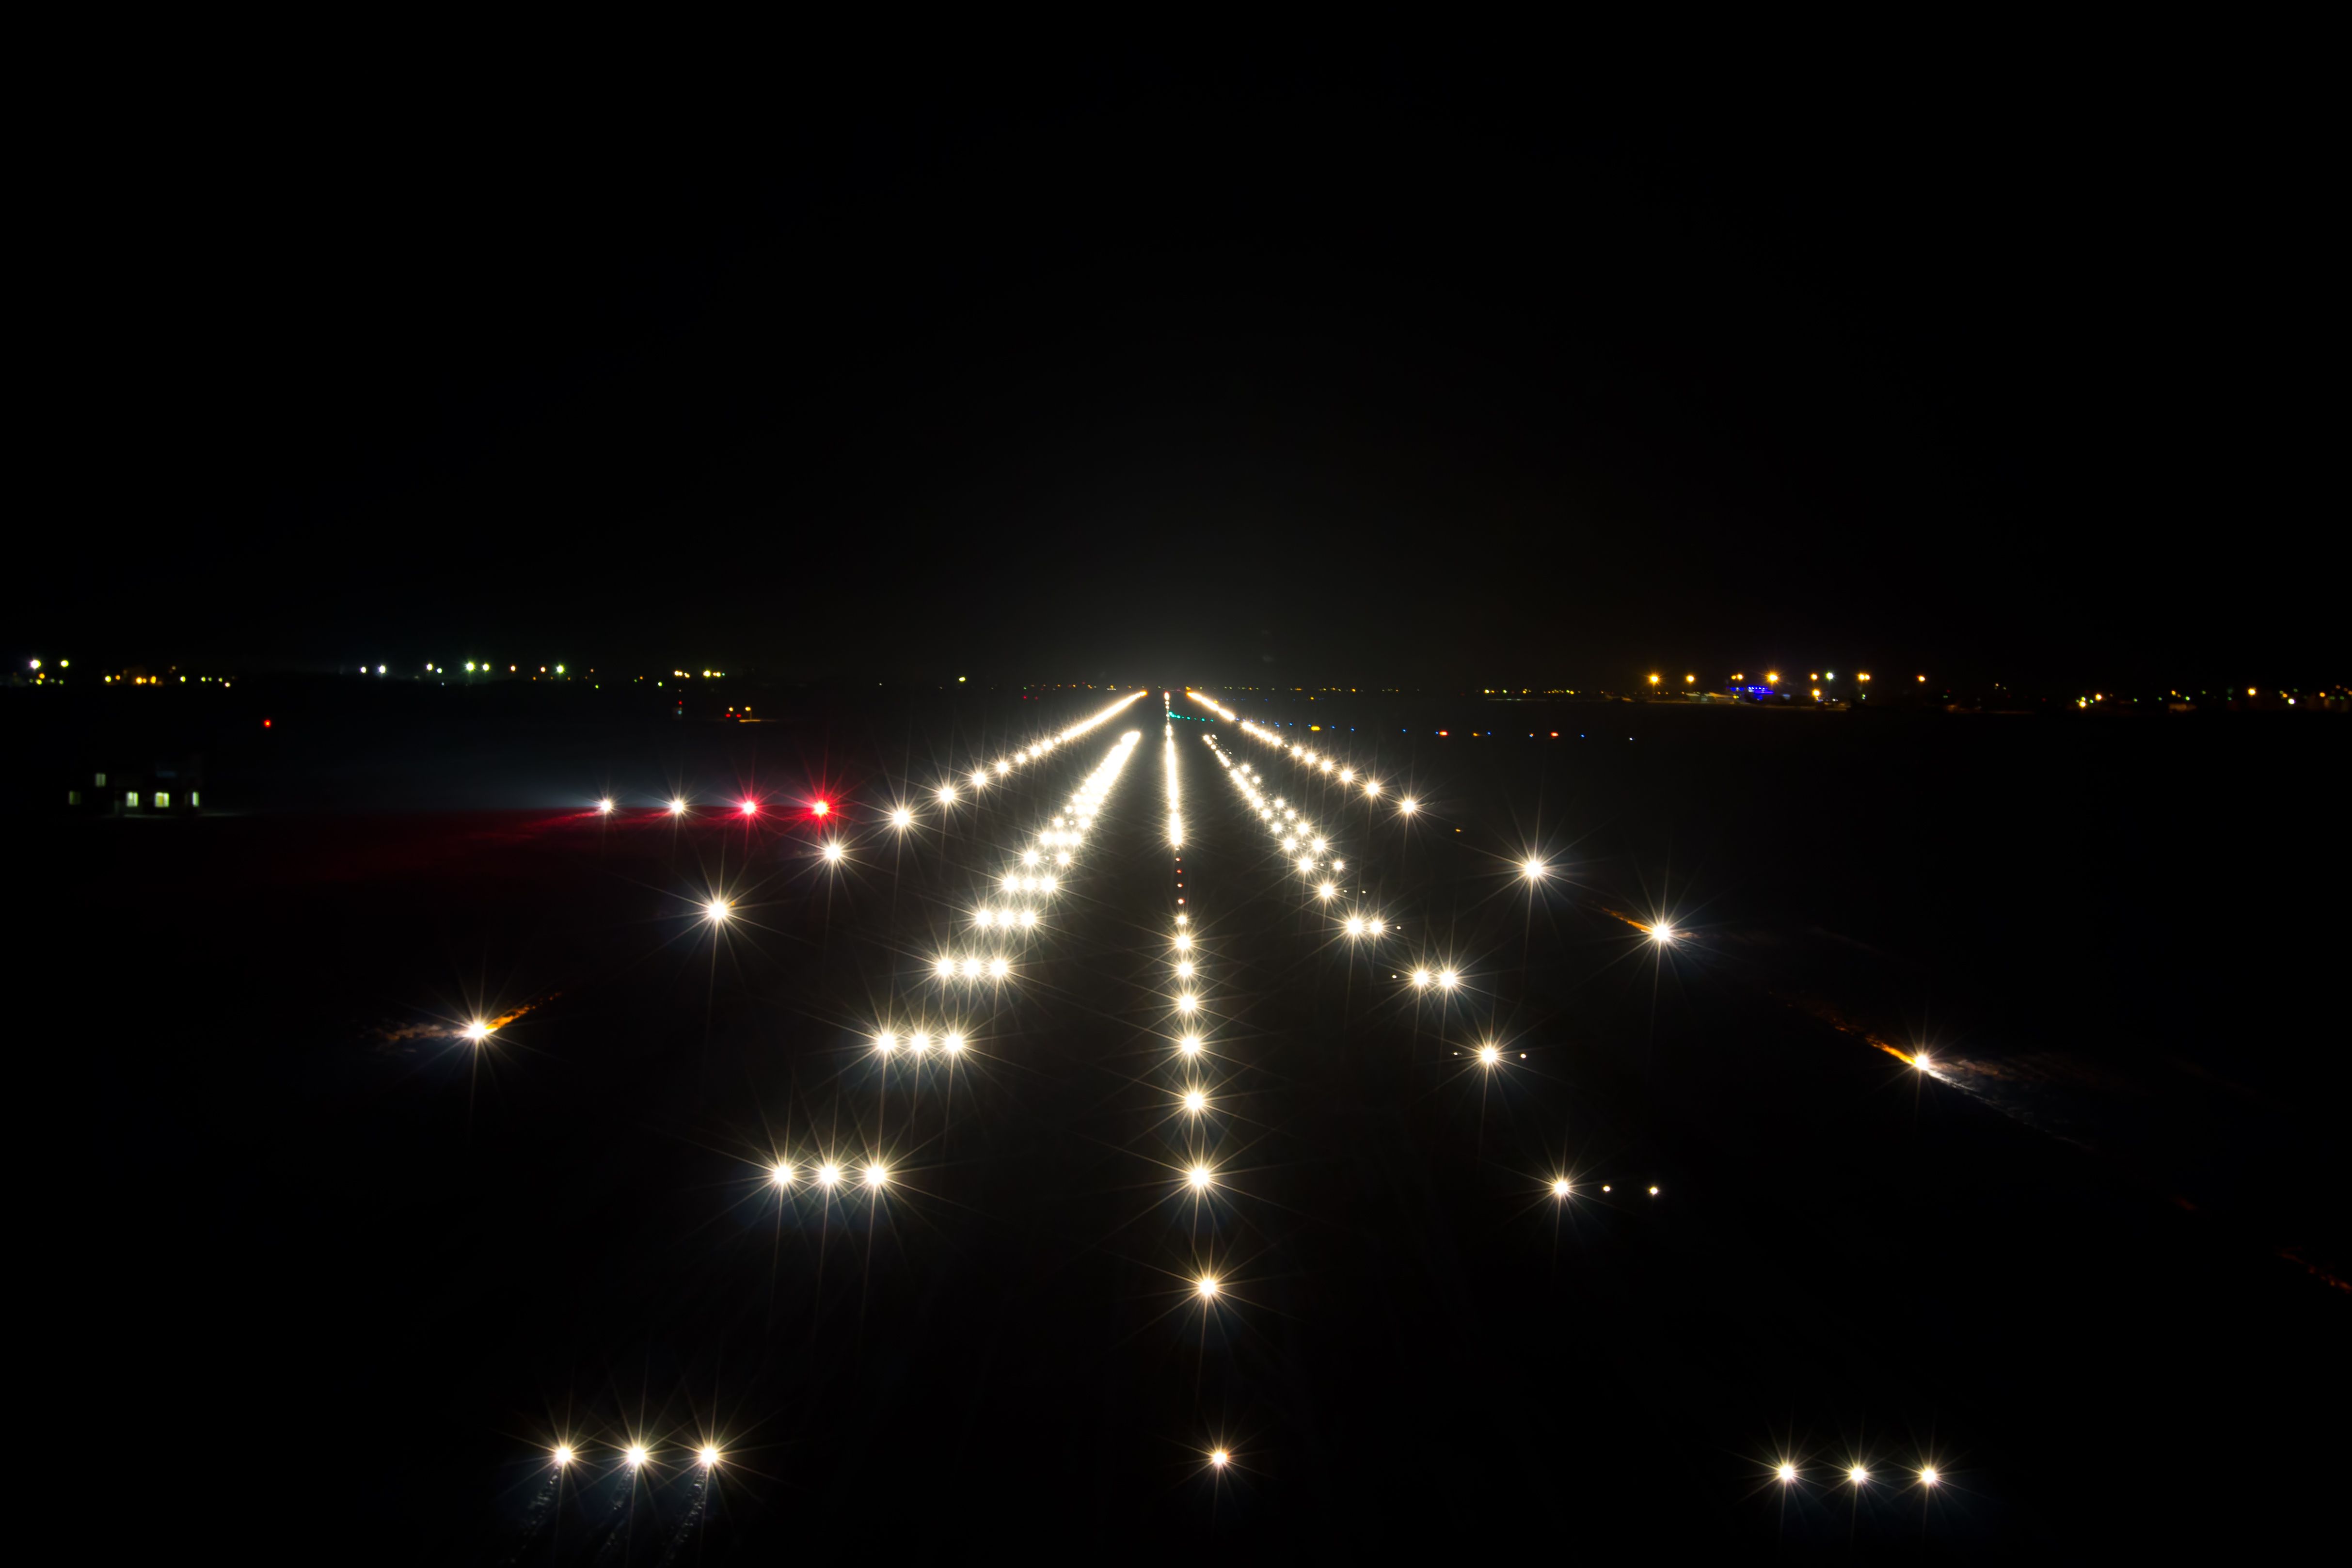 Runway Lights Were “Not Working” During Delta Air Lines Airbus A330-200 ...